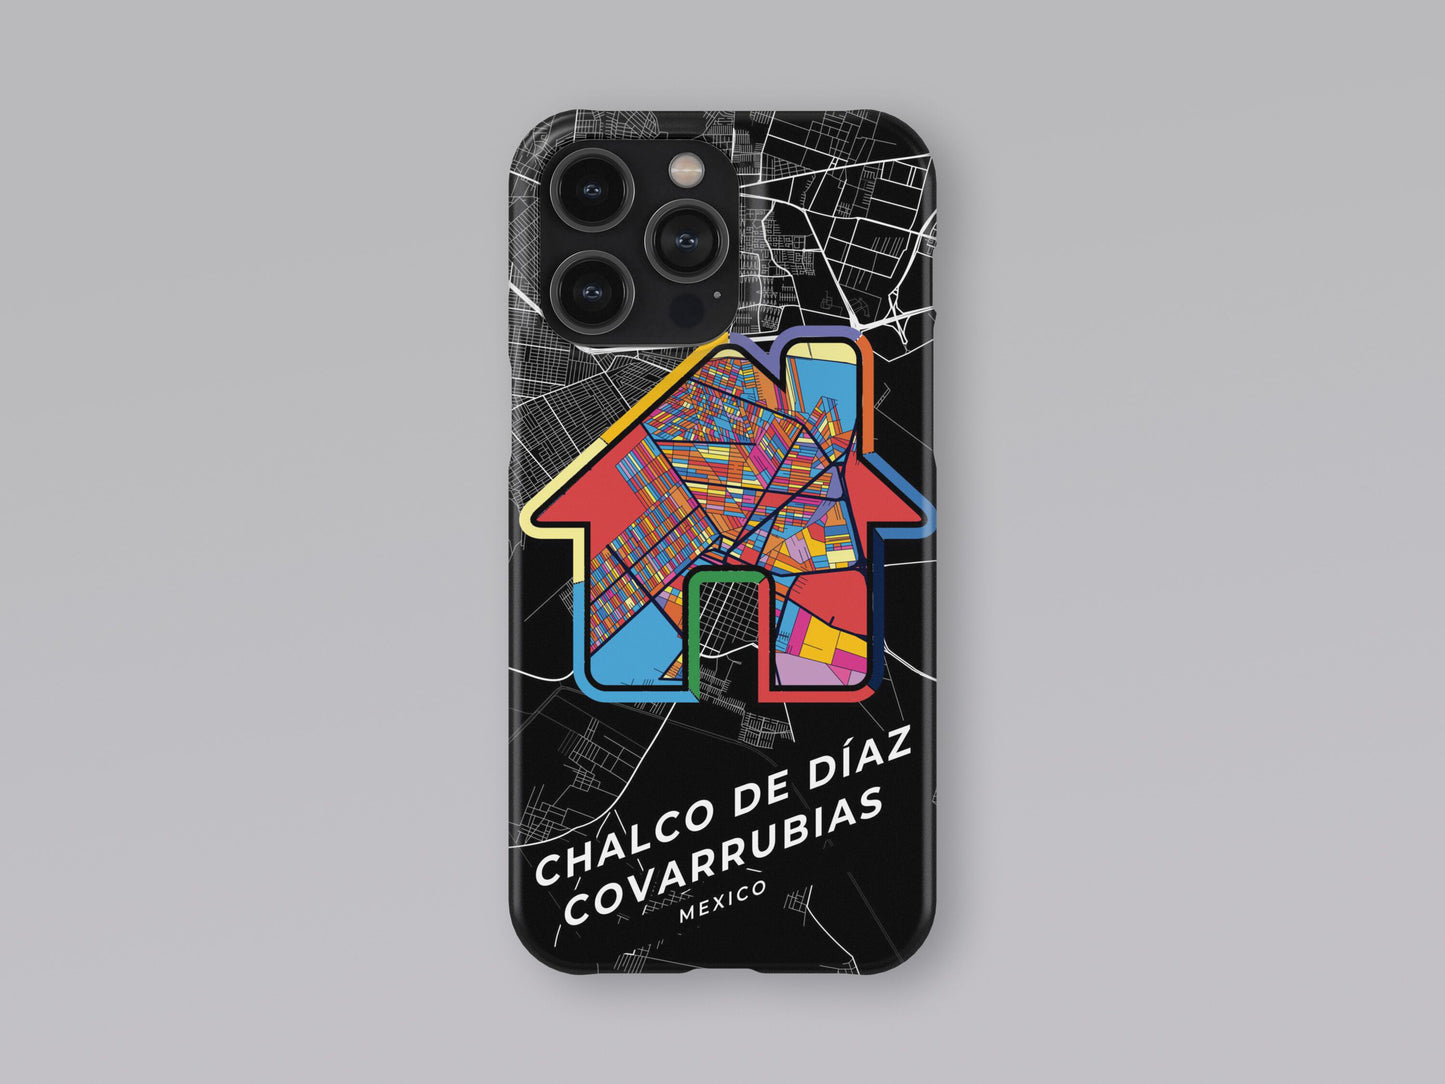 Chalco De Díaz Covarrubias Mexico slim phone case with colorful icon. Birthday, wedding or housewarming gift. Couple match cases. 3